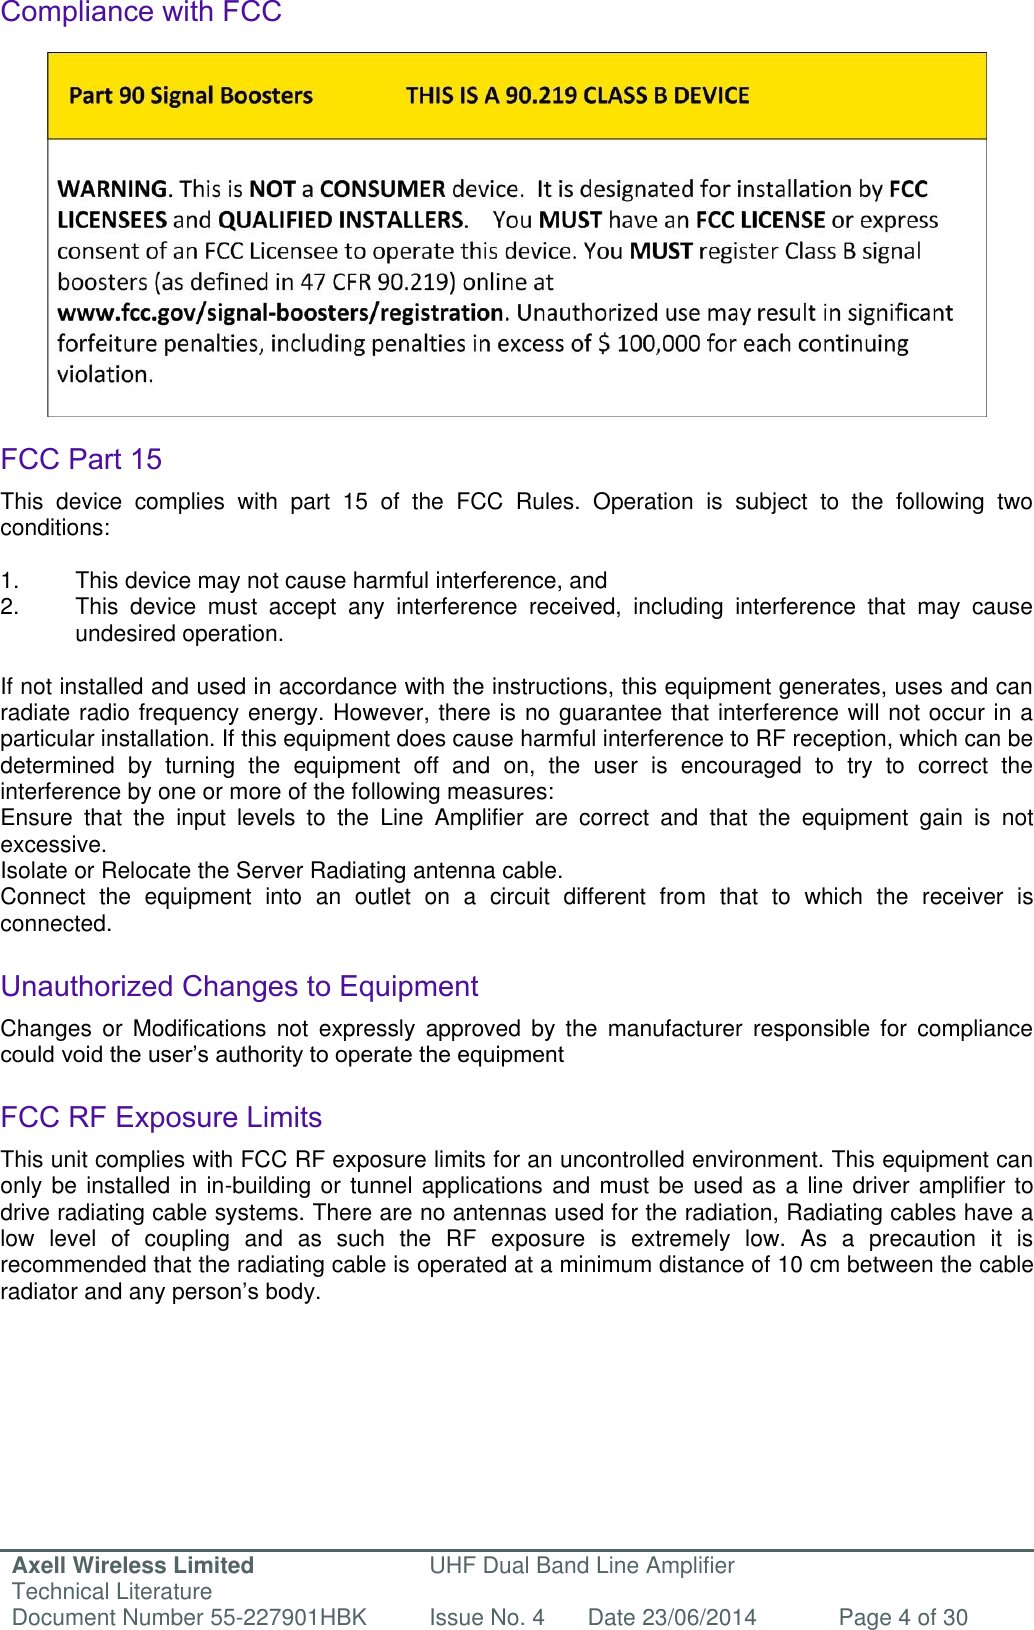 Axell Wireless Limited Technical Literature UHF Dual Band Line Amplifier Document Number 55-227901HBK Issue No. 4 Date 23/06/2014 Page 4 of 30   Compliance with FCC                FCC Part 15 This  device  complies  with  part  15  of  the  FCC  Rules.  Operation  is  subject  to  the  following  two conditions:   1.  This device may not cause harmful interference, and   2.  This  device  must  accept  any  interference  received,  including  interference  that  may  cause   undesired operation.   If not installed and used in accordance with the instructions, this equipment generates, uses and can radiate radio frequency energy. However, there is no guarantee that interference will not occur in a particular installation. If this equipment does cause harmful interference to RF reception, which can be determined  by  turning  the  equipment  off  and  on,  the  user  is  encouraged  to  try  to  correct  the interference by one or more of the following measures: Ensure  that  the  input  levels  to  the  Line  Amplifier  are  correct  and  that  the  equipment  gain  is  not excessive. Isolate or Relocate the Server Radiating antenna cable. Connect  the  equipment  into  an  outlet  on  a  circuit  different  from  that  to  which  the  receiver  is connected.  Unauthorized Changes to Equipment Changes  or  Modifications  not  expressly  approved  by  the  manufacturer  responsible  for  compliance could void the user’s authority to operate the equipment  FCC RF Exposure Limits This unit complies with FCC RF exposure limits for an uncontrolled environment. This equipment can only be installed in in-building or tunnel applications and must be used as a line driver amplifier to drive radiating cable systems. There are no antennas used for the radiation, Radiating cables have a low  level  of  coupling  and  as  such  the  RF  exposure  is  extremely  low.  As  a  precaution  it  is recommended that the radiating cable is operated at a minimum distance of 10 cm between the cable radiator and any person’s body.          